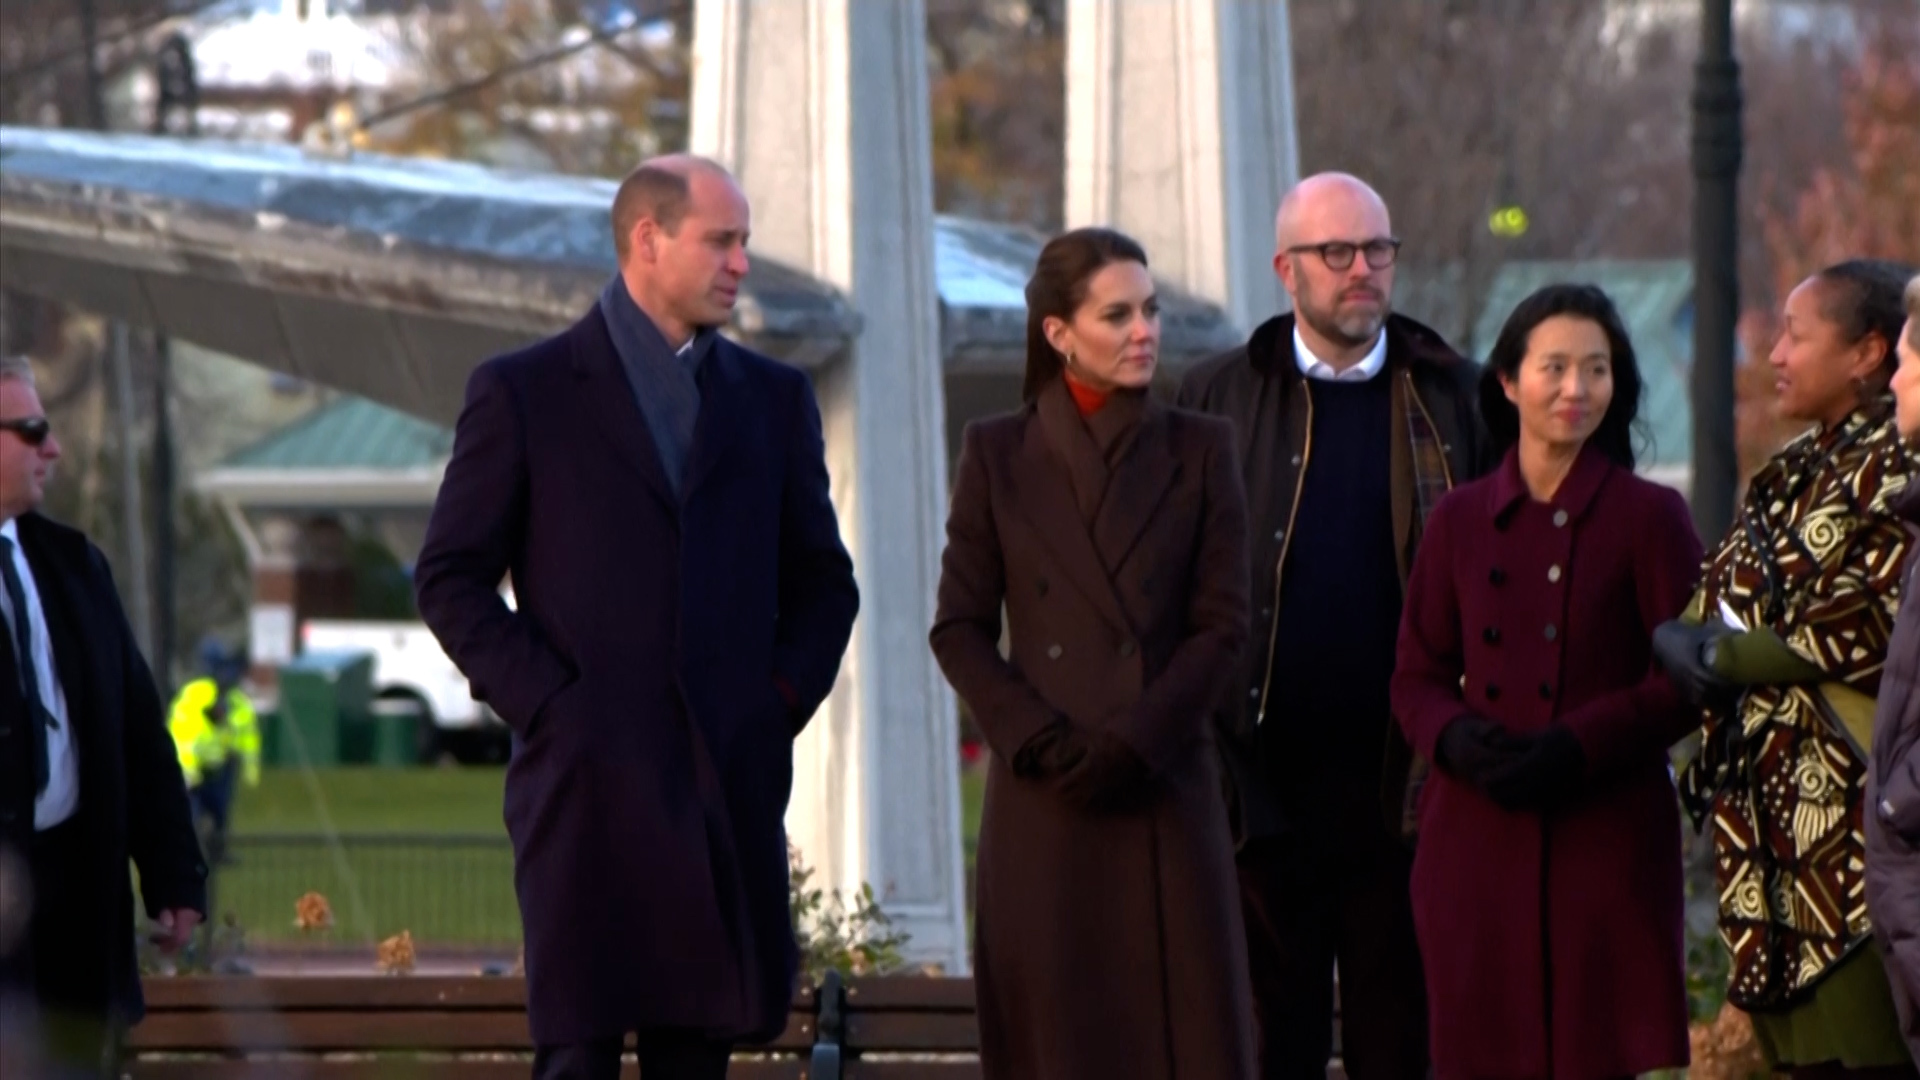 Prince William and Kate Middleton take a stroll in Piers Park in Boston